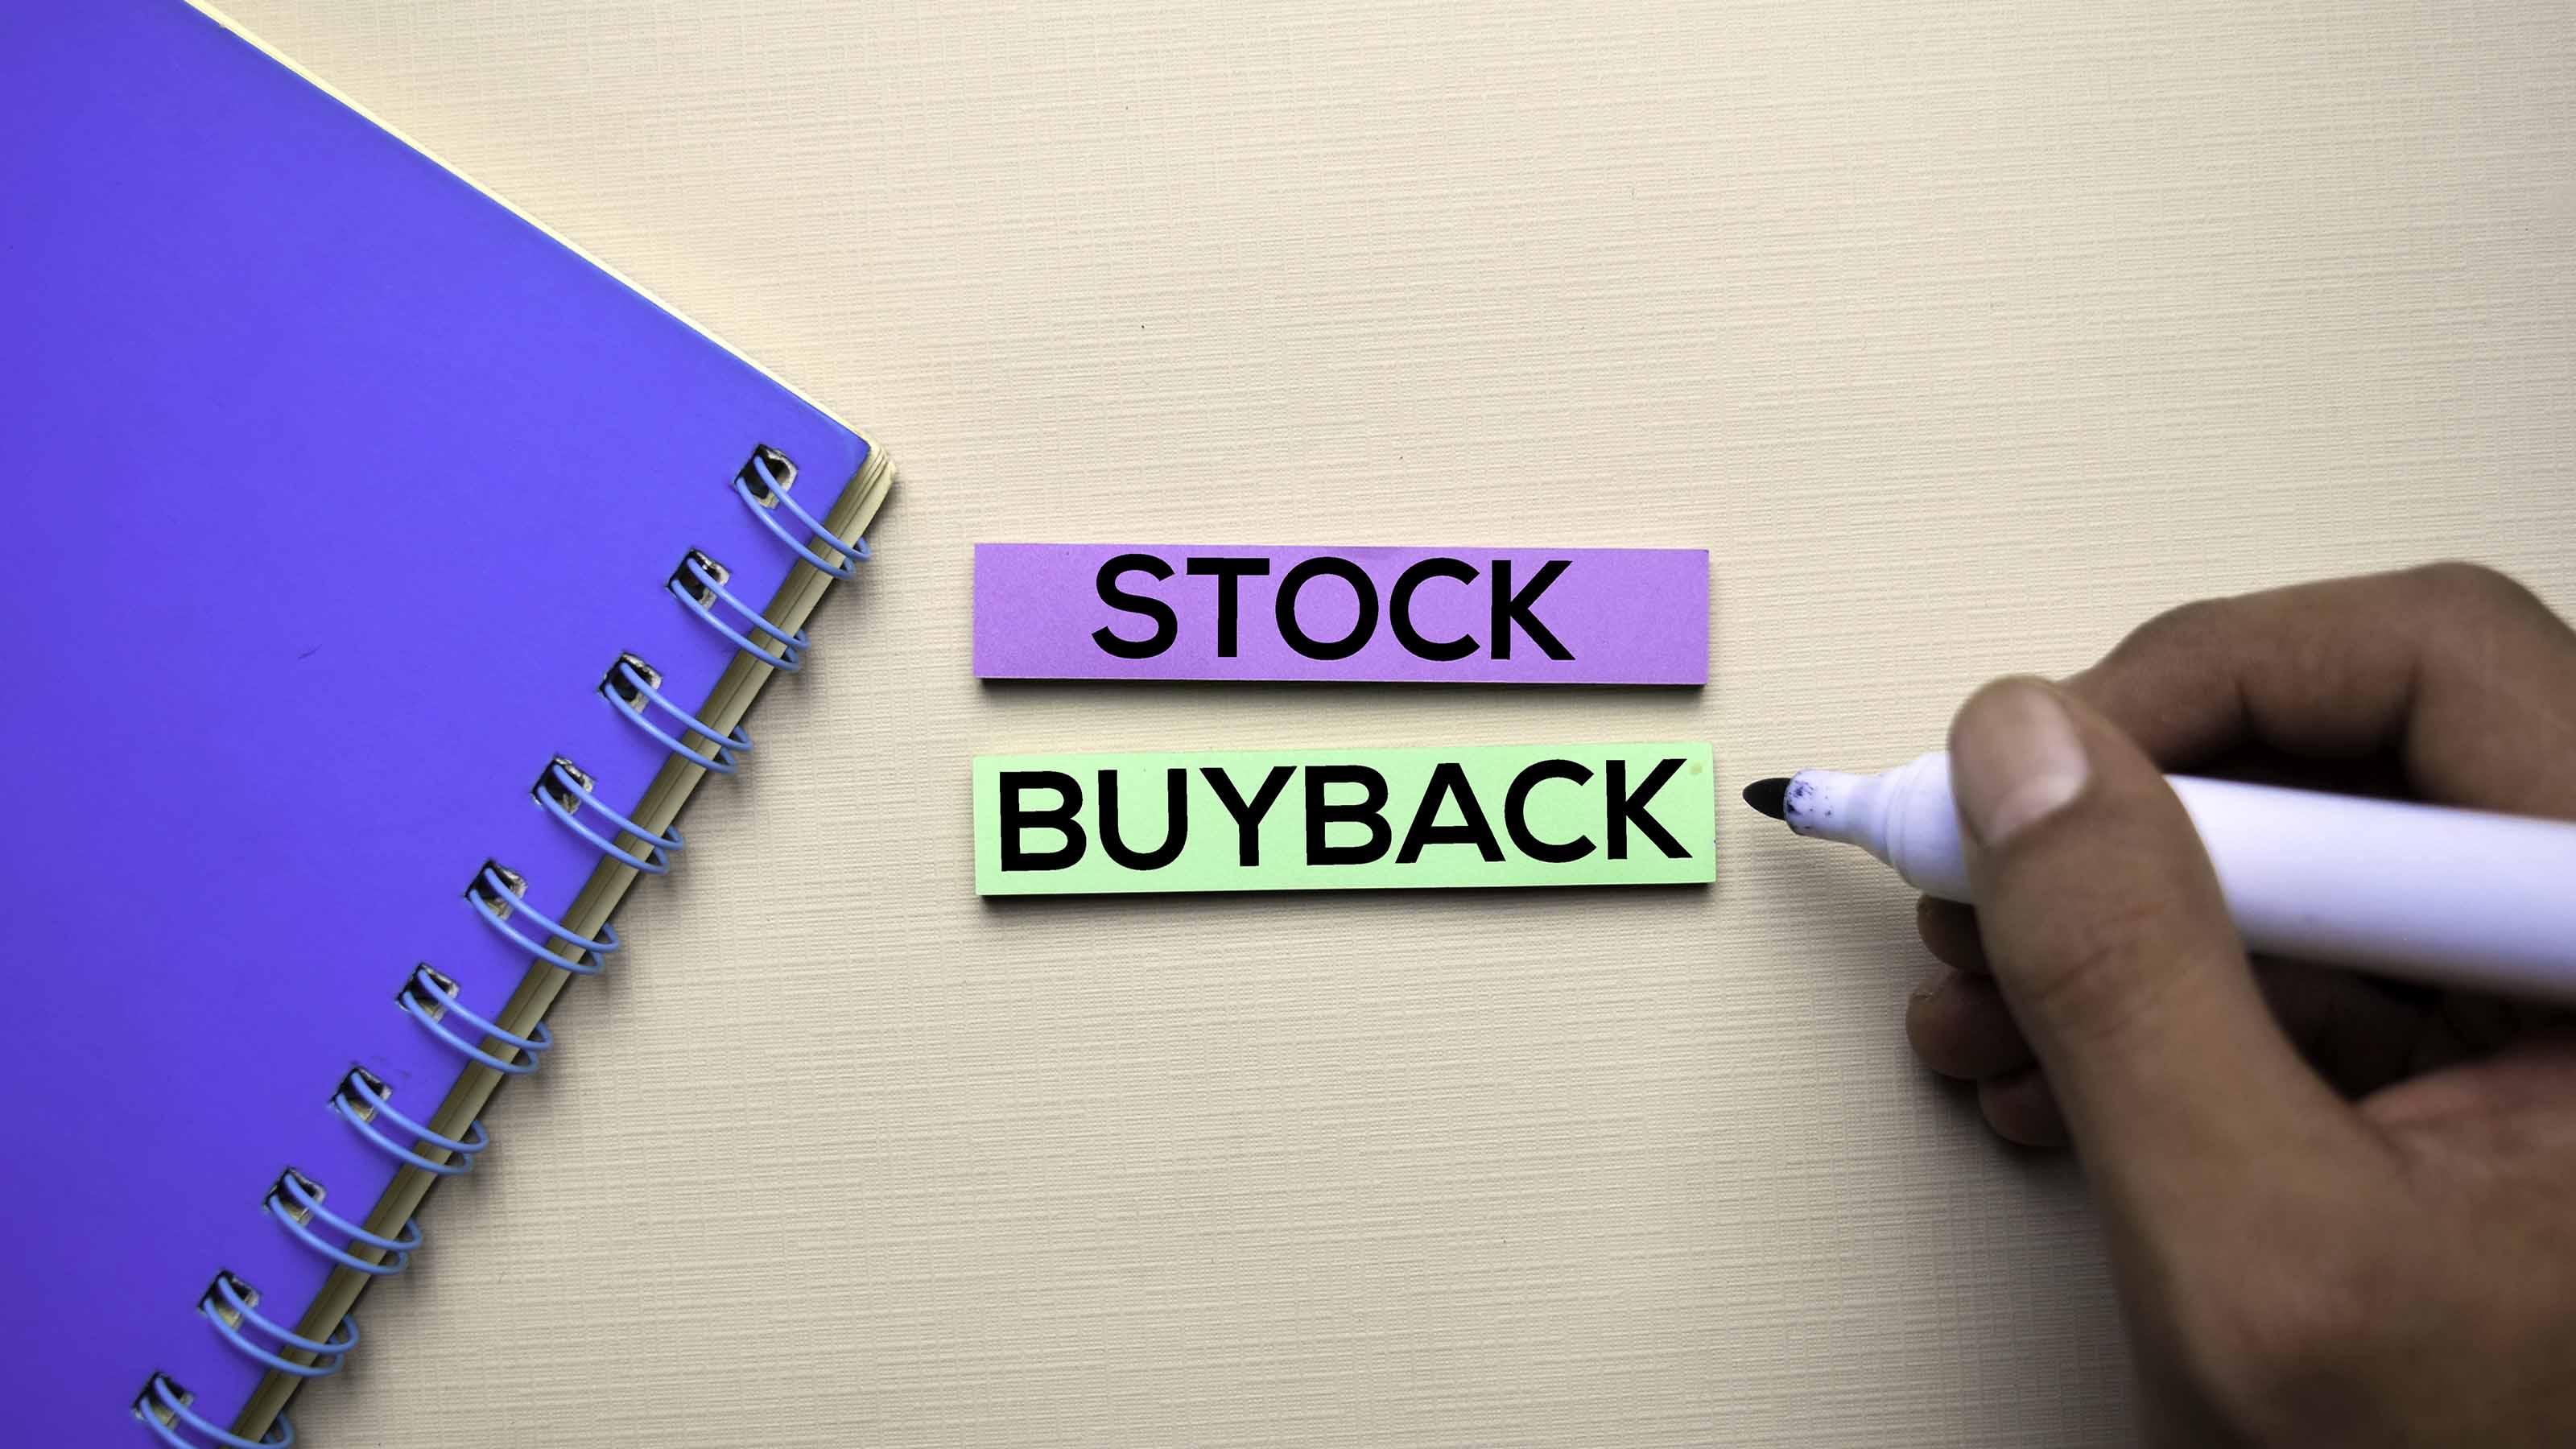 What Is a Stock Buyback?